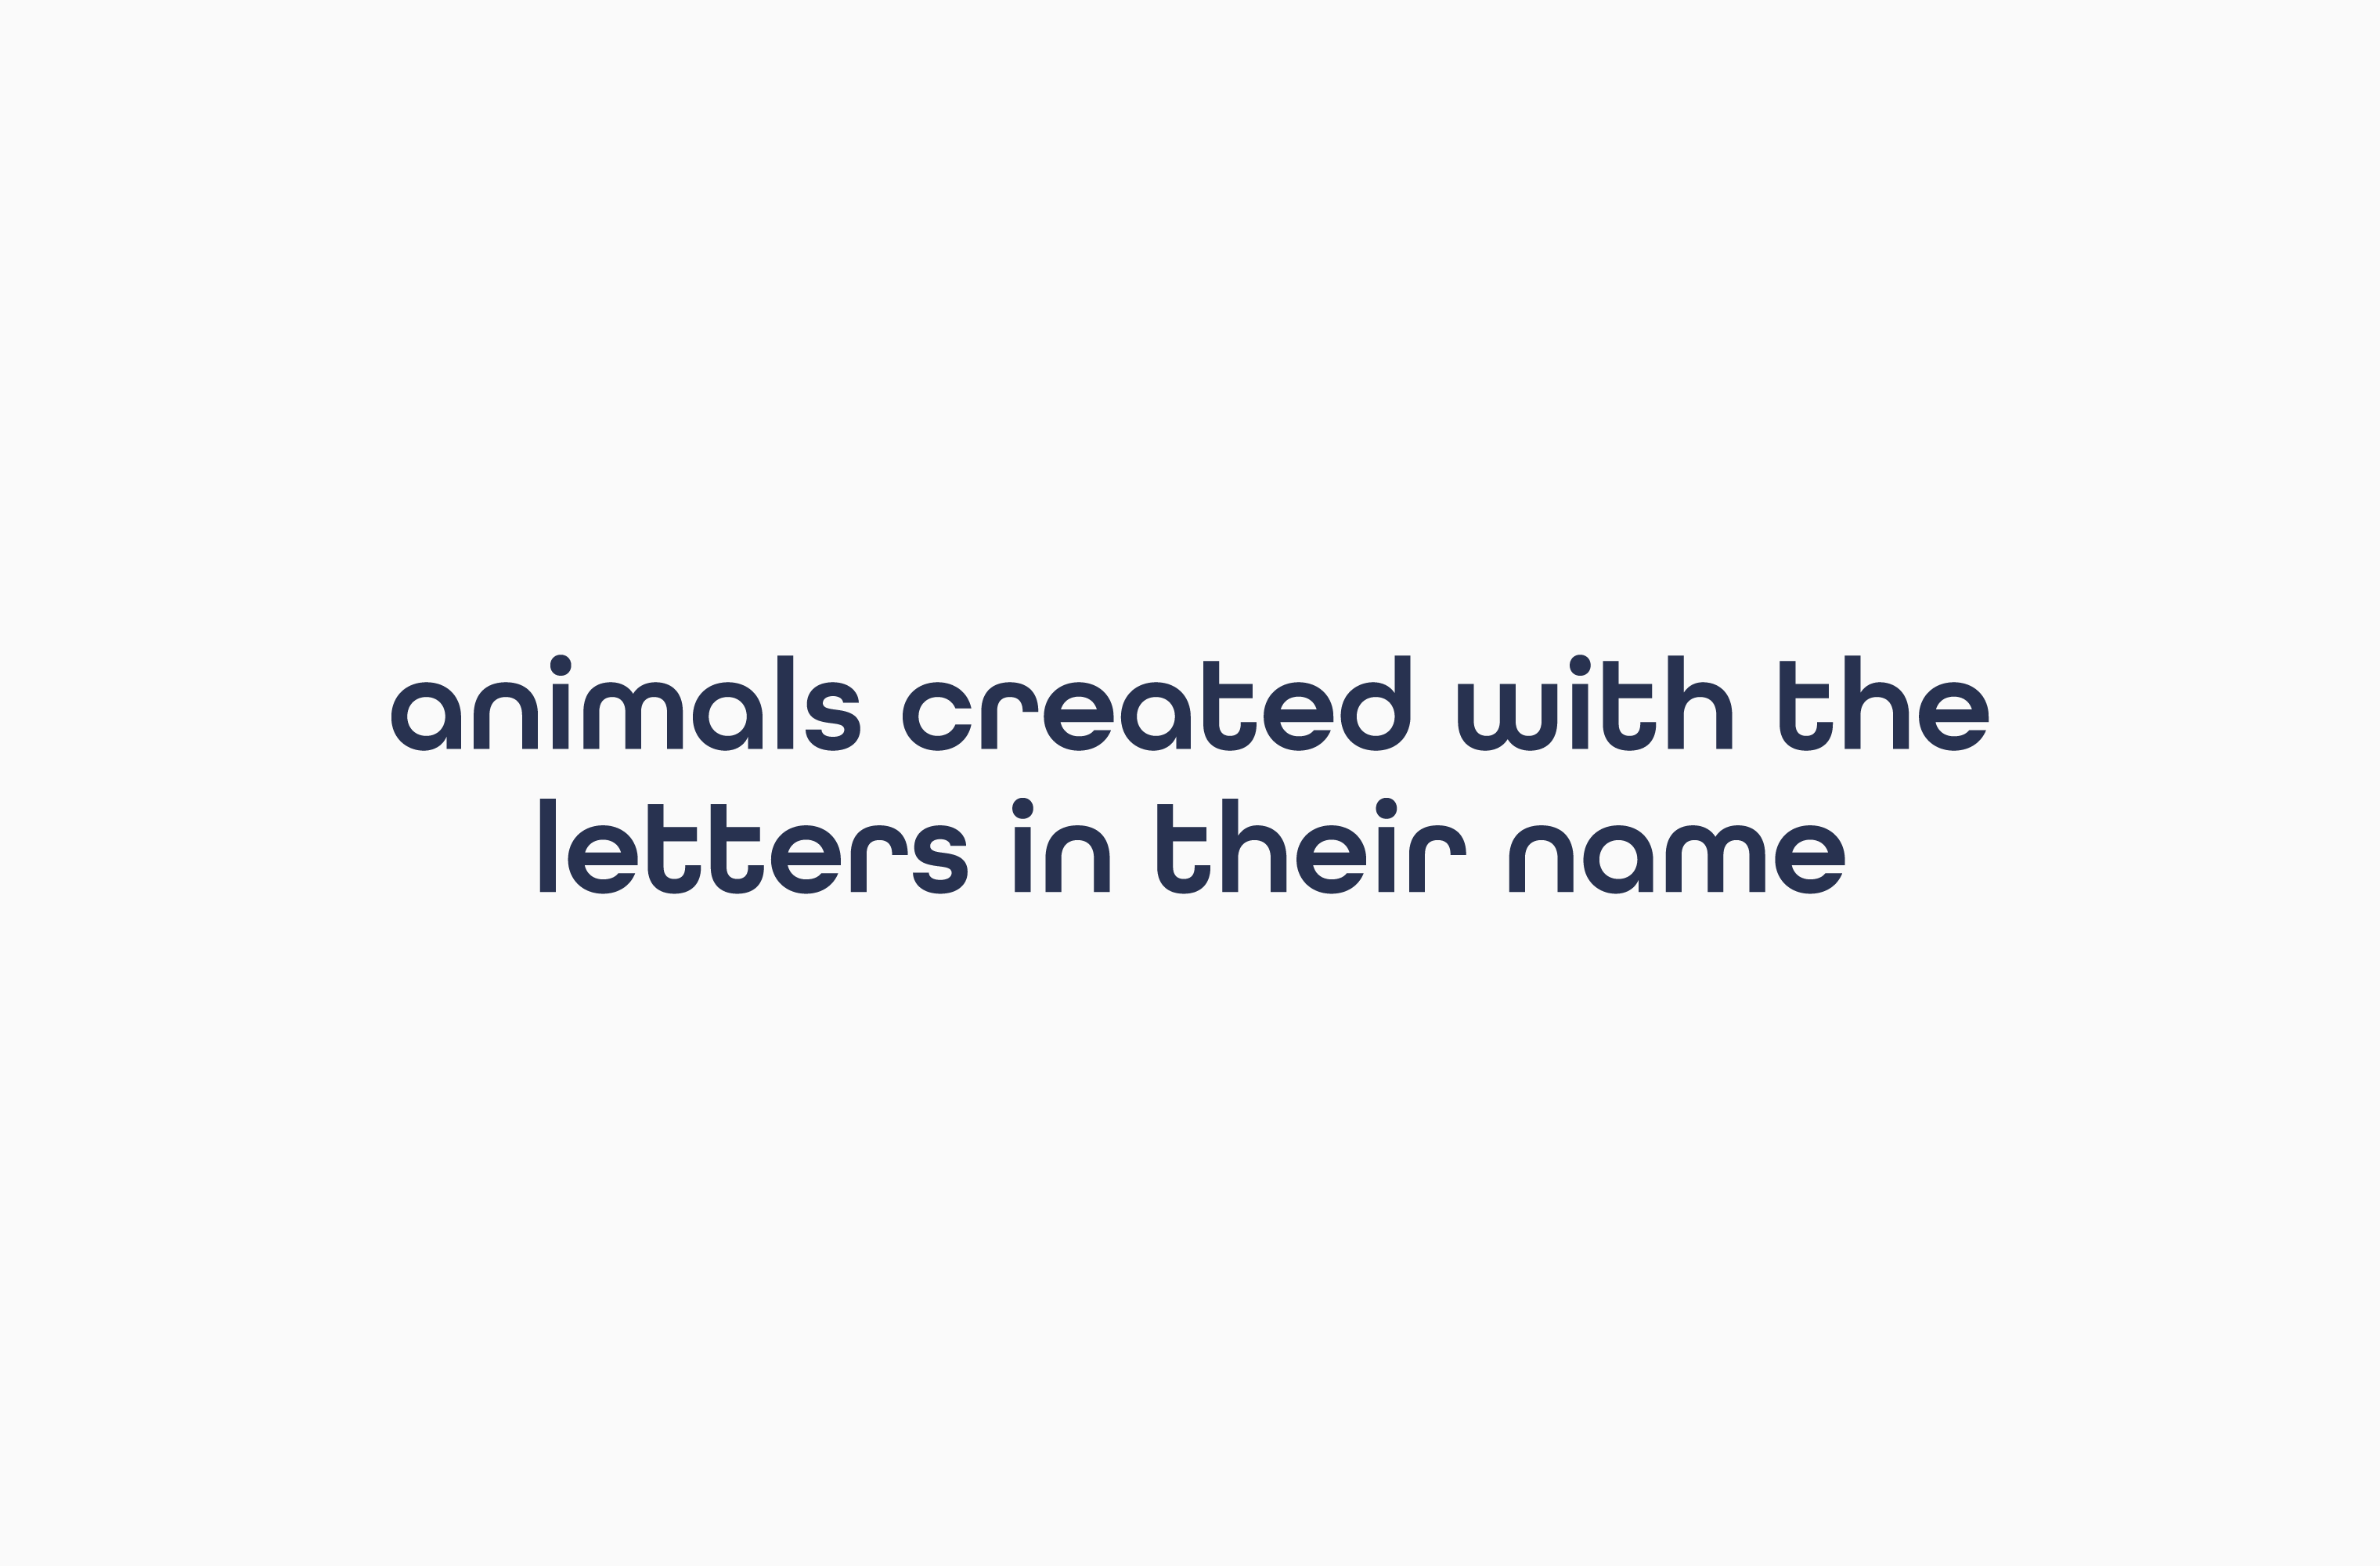 One-liner describing Word Animals as 'animals created with the letters in their name